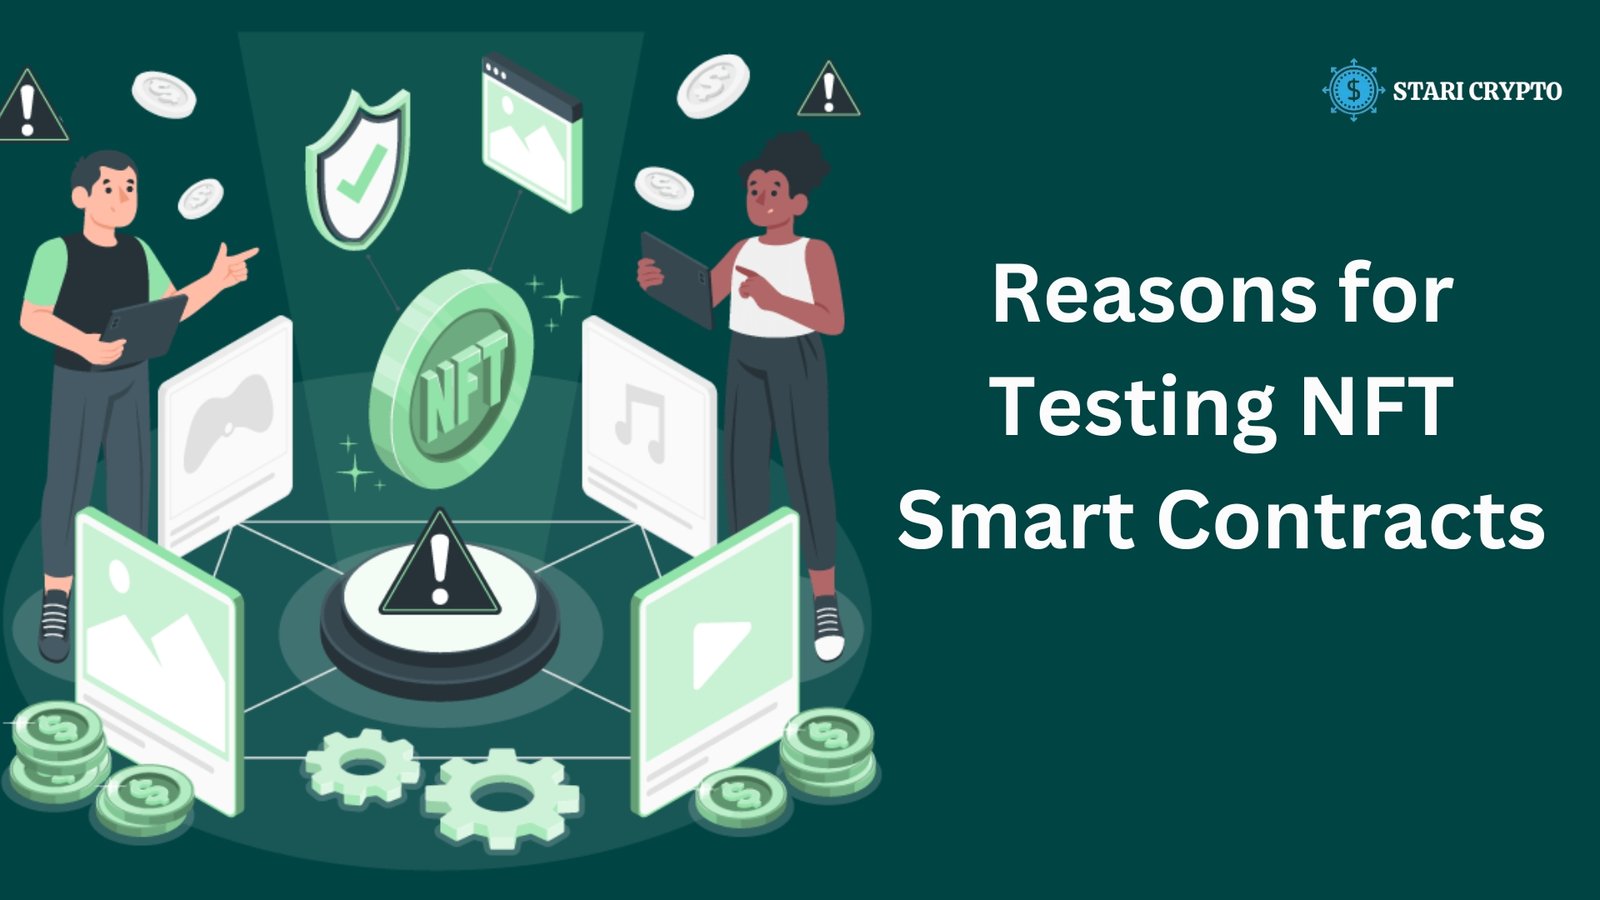 Reasons for Testing NFT Smart Contracts